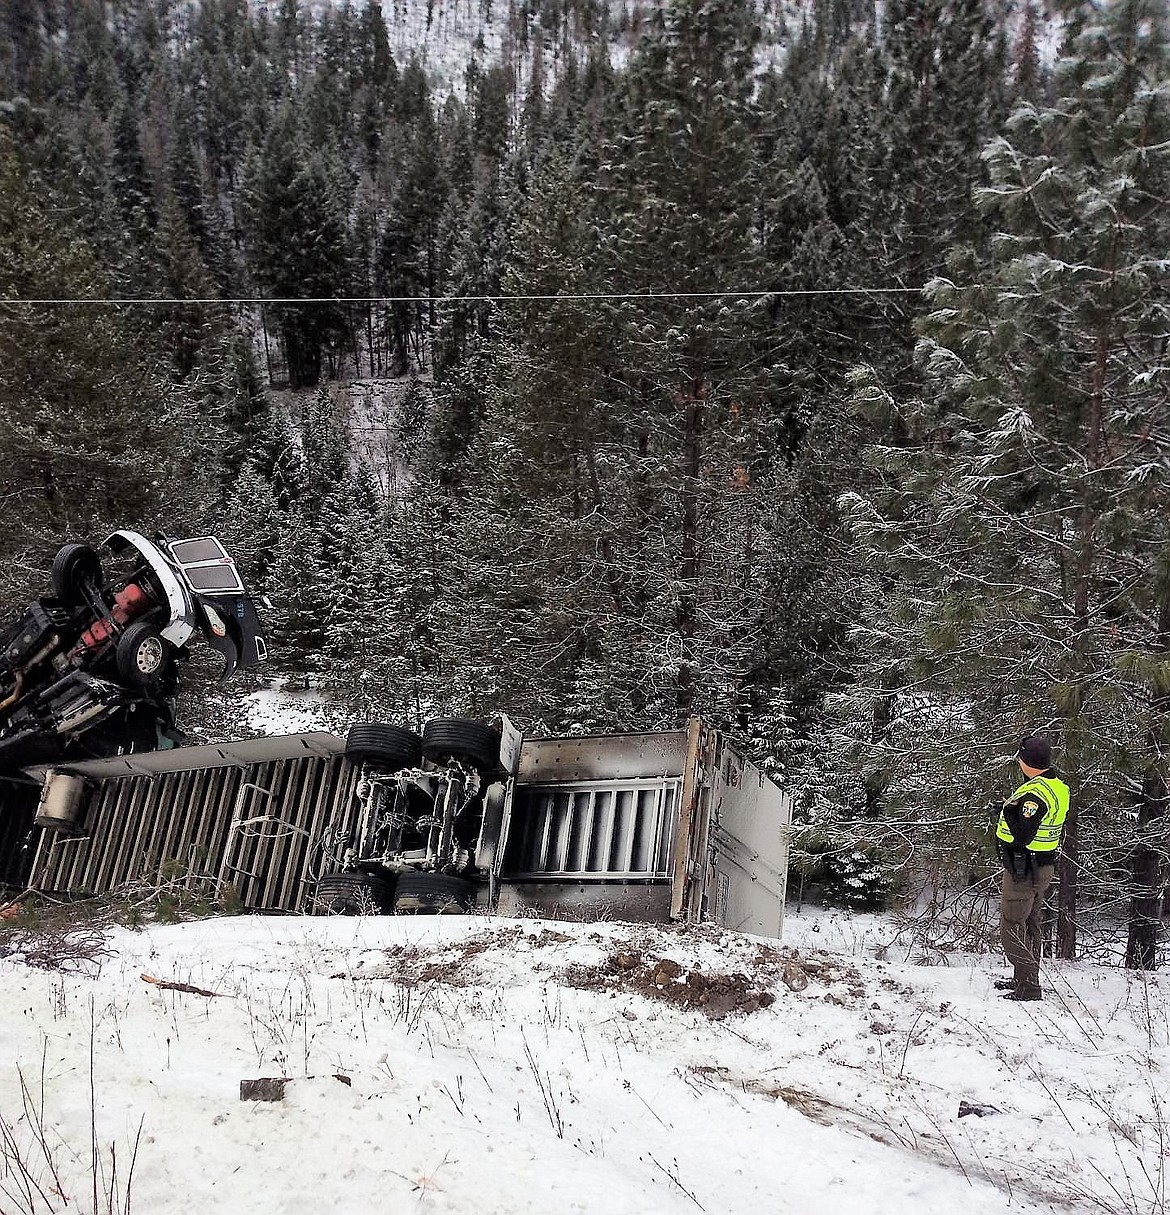 A semi-truck carrying beer tipped over on I-90 near St. Regis on Jan. 1, nearly hitting electrical lines. No injuries were reported. (Photo courtesy of Kat Kitteridge)